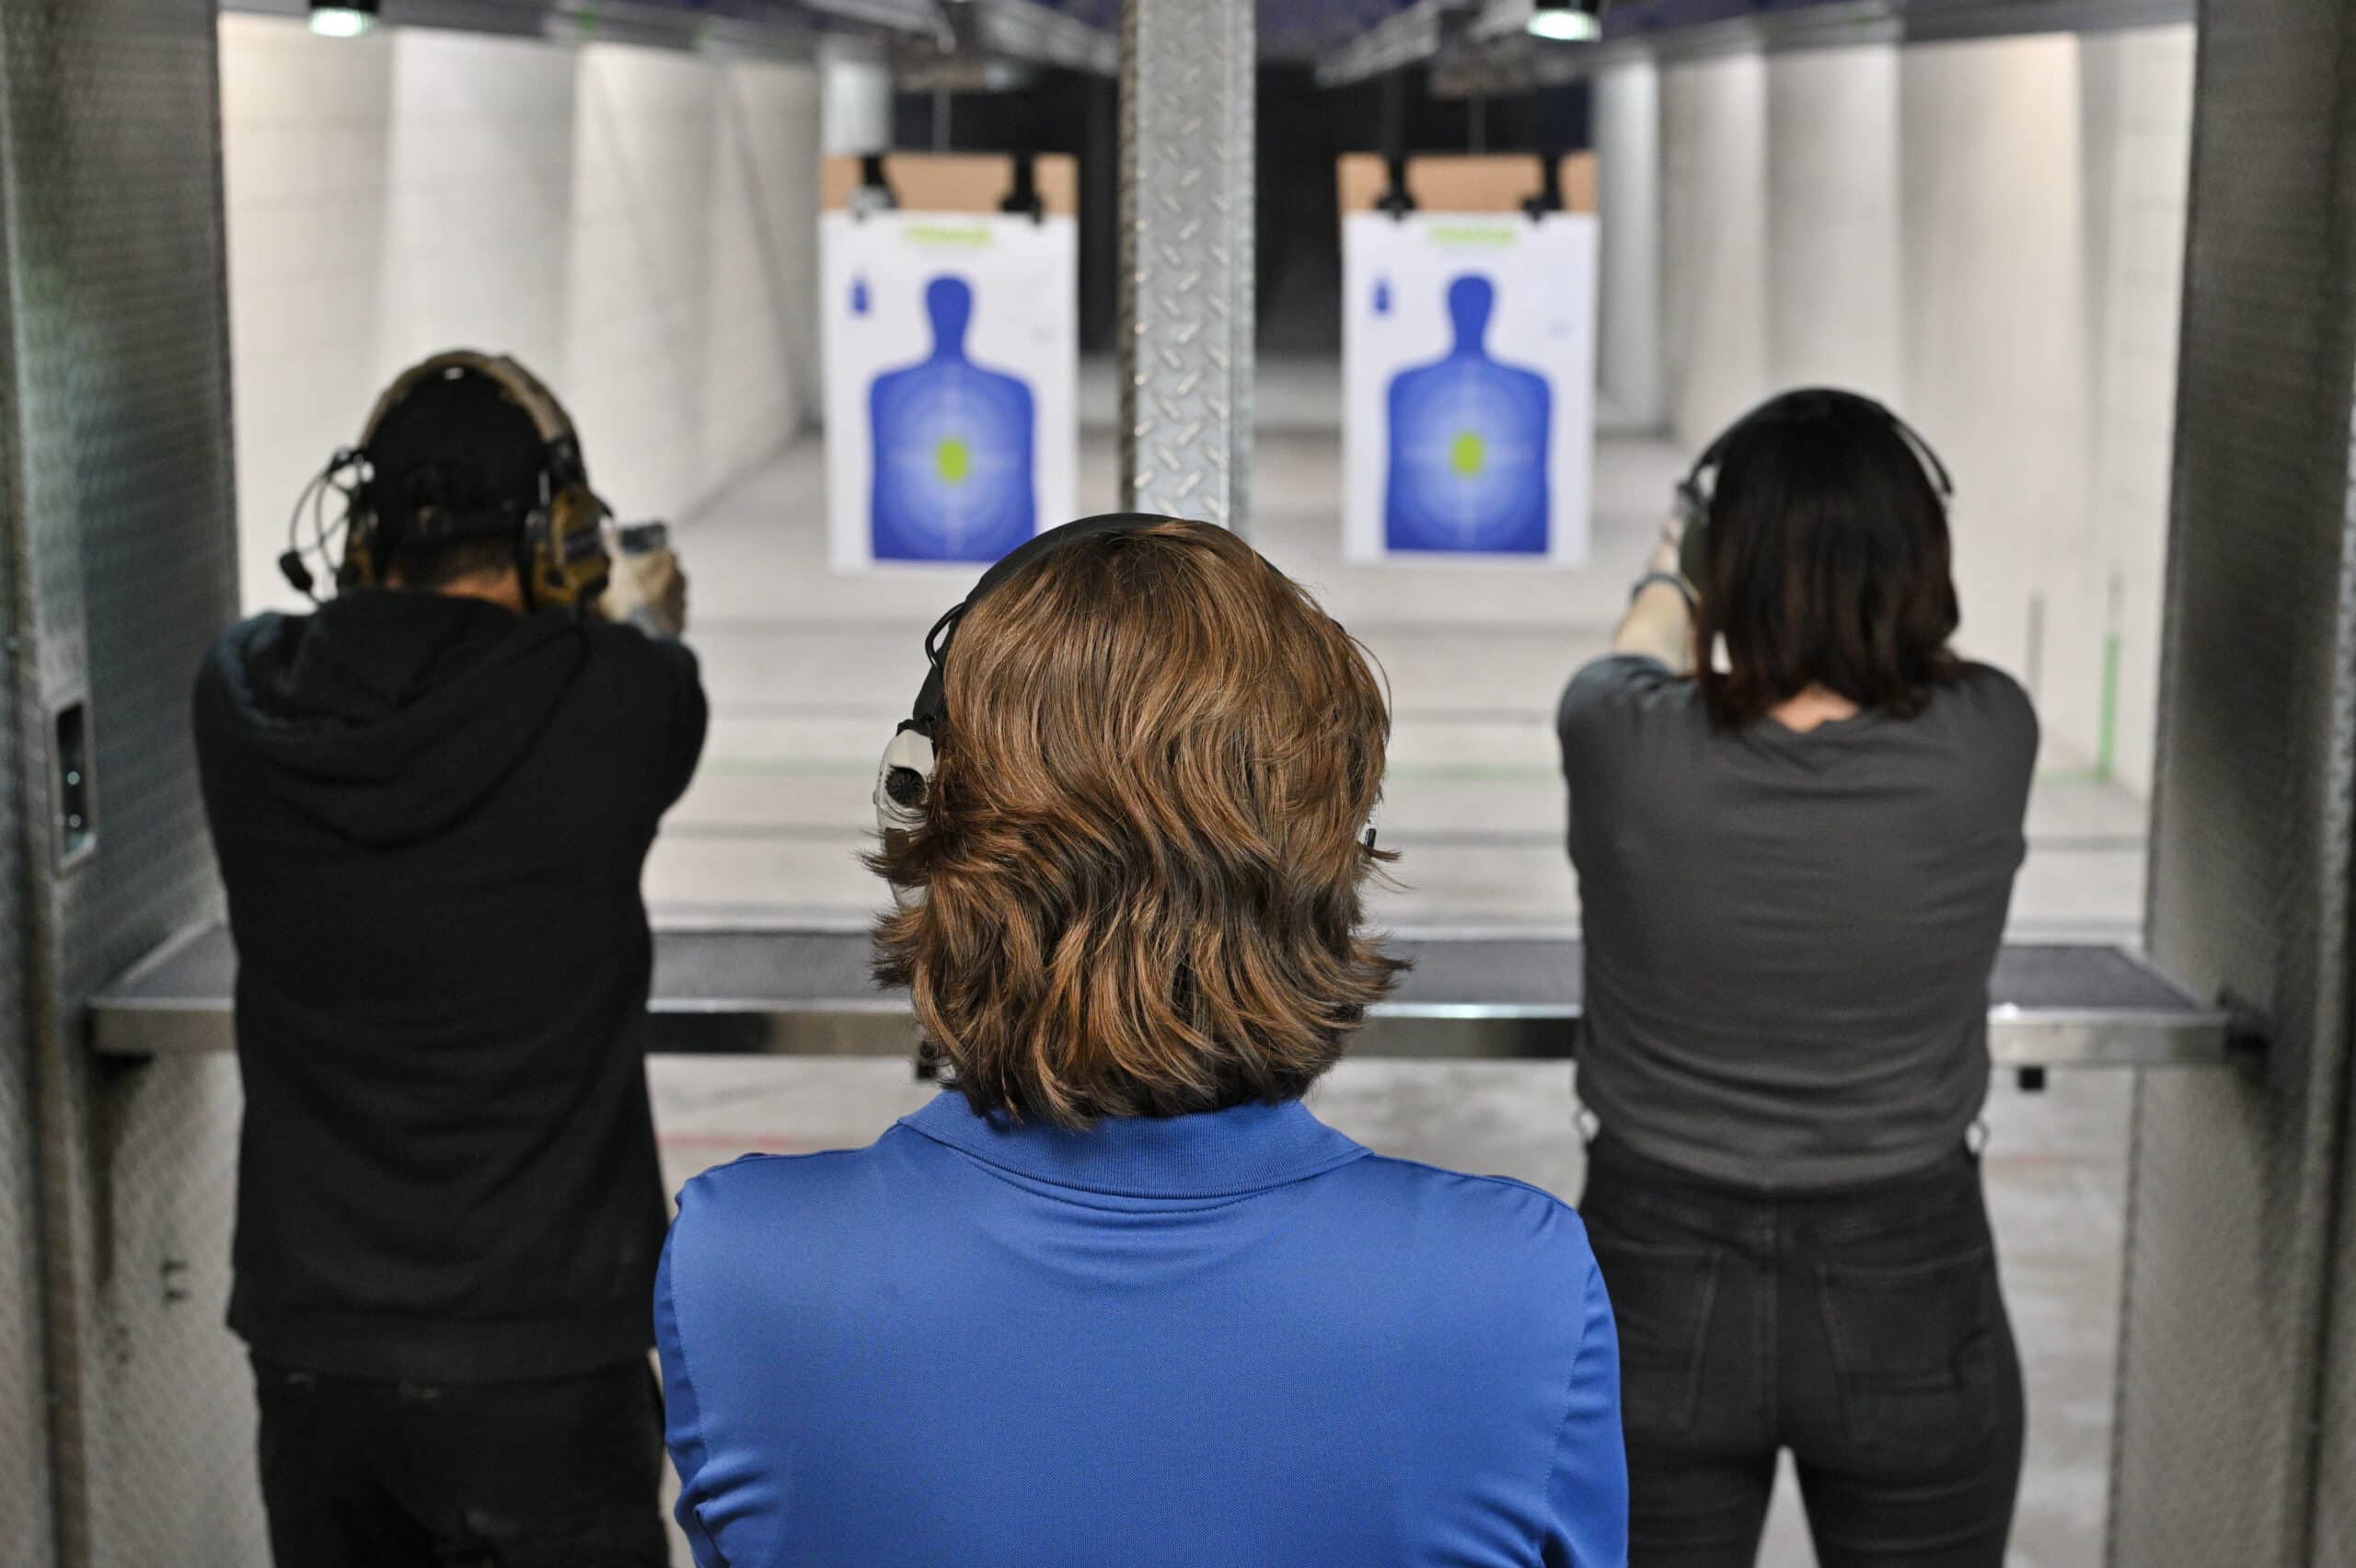 A CCW instructor at The Range 702 in Las Vegas observes students on the shooting range